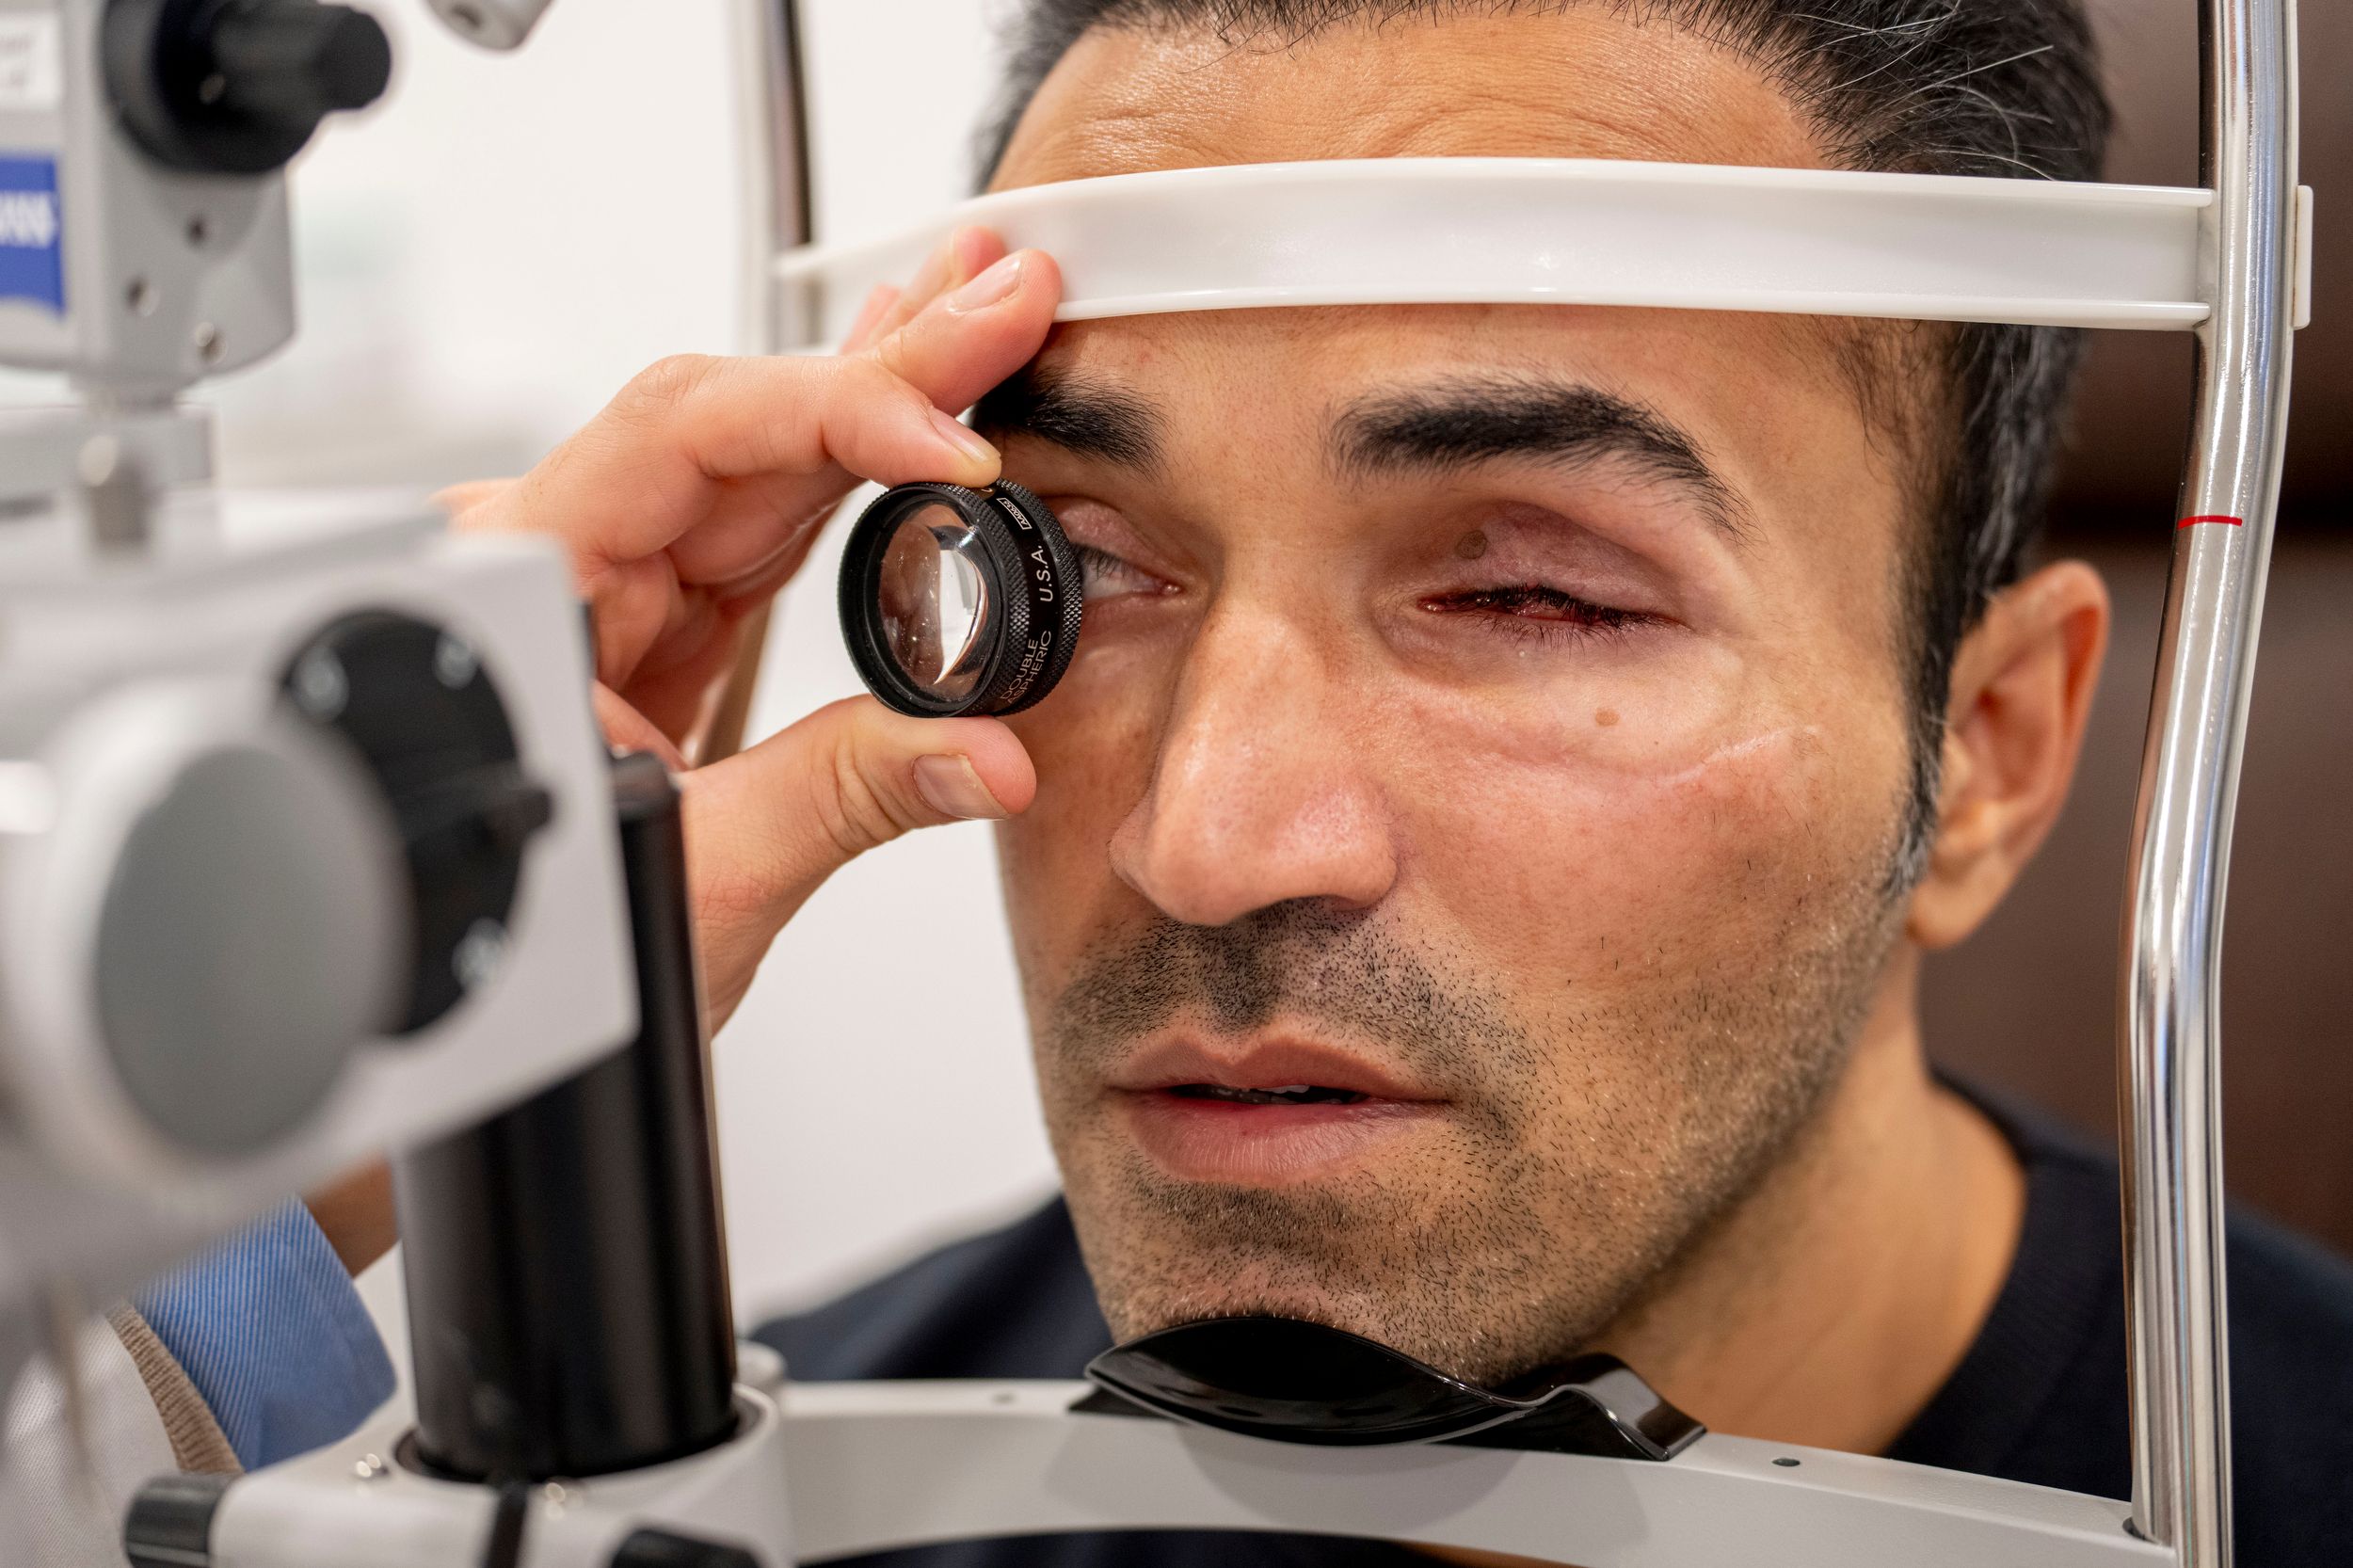 Showing treatment for eye injury on iranian who was shot in the eye